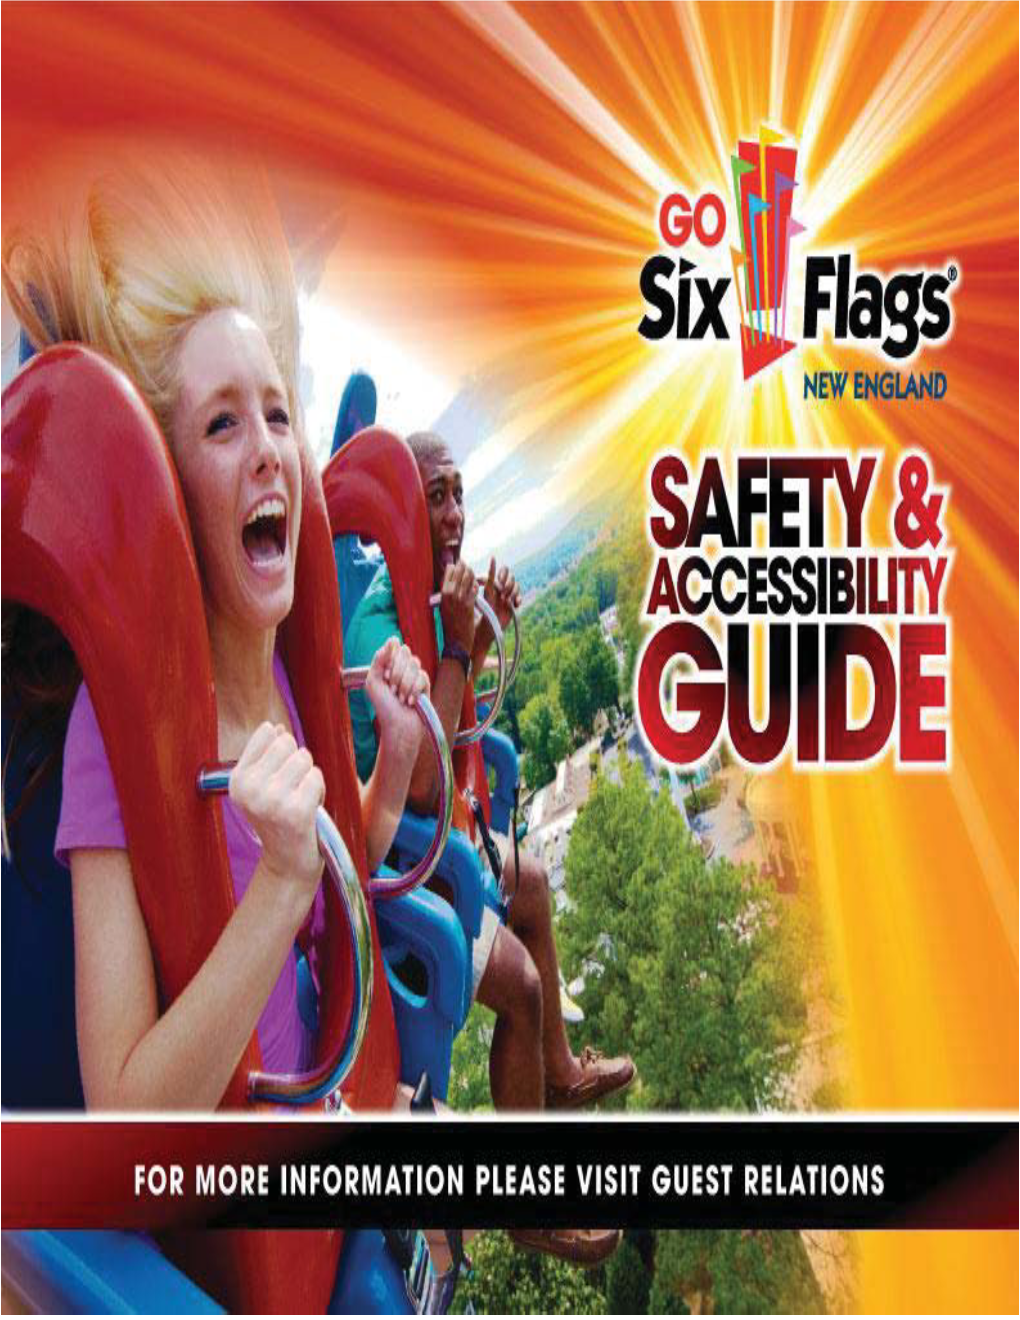 Ride Information” Section of This Guide for to Enter the Ride Through the Standard Queue